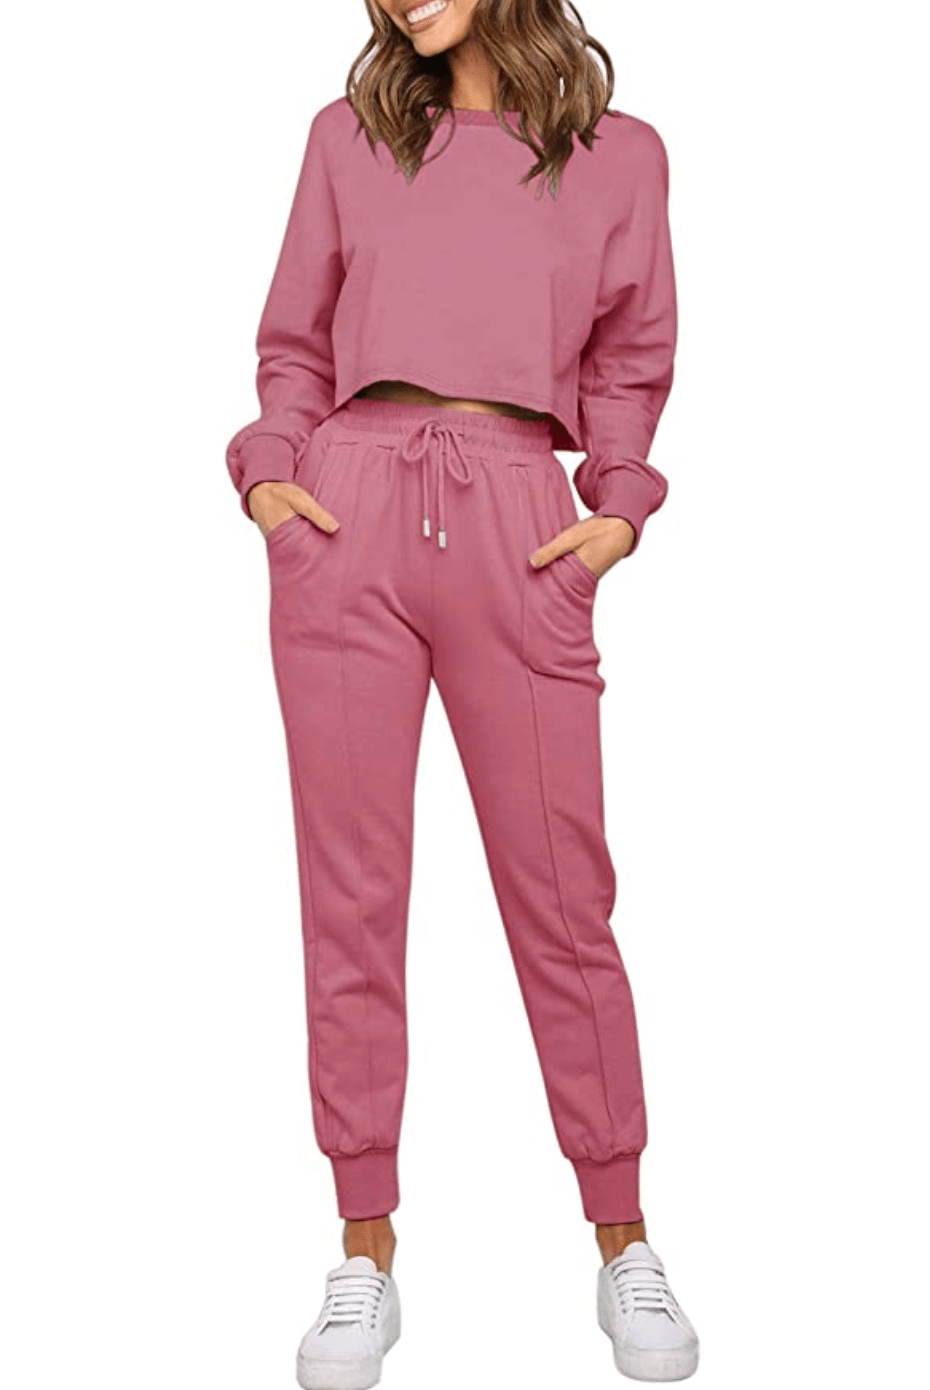 2 Piece Jogger Outfits Women, Joggers Outfit Women Fashion